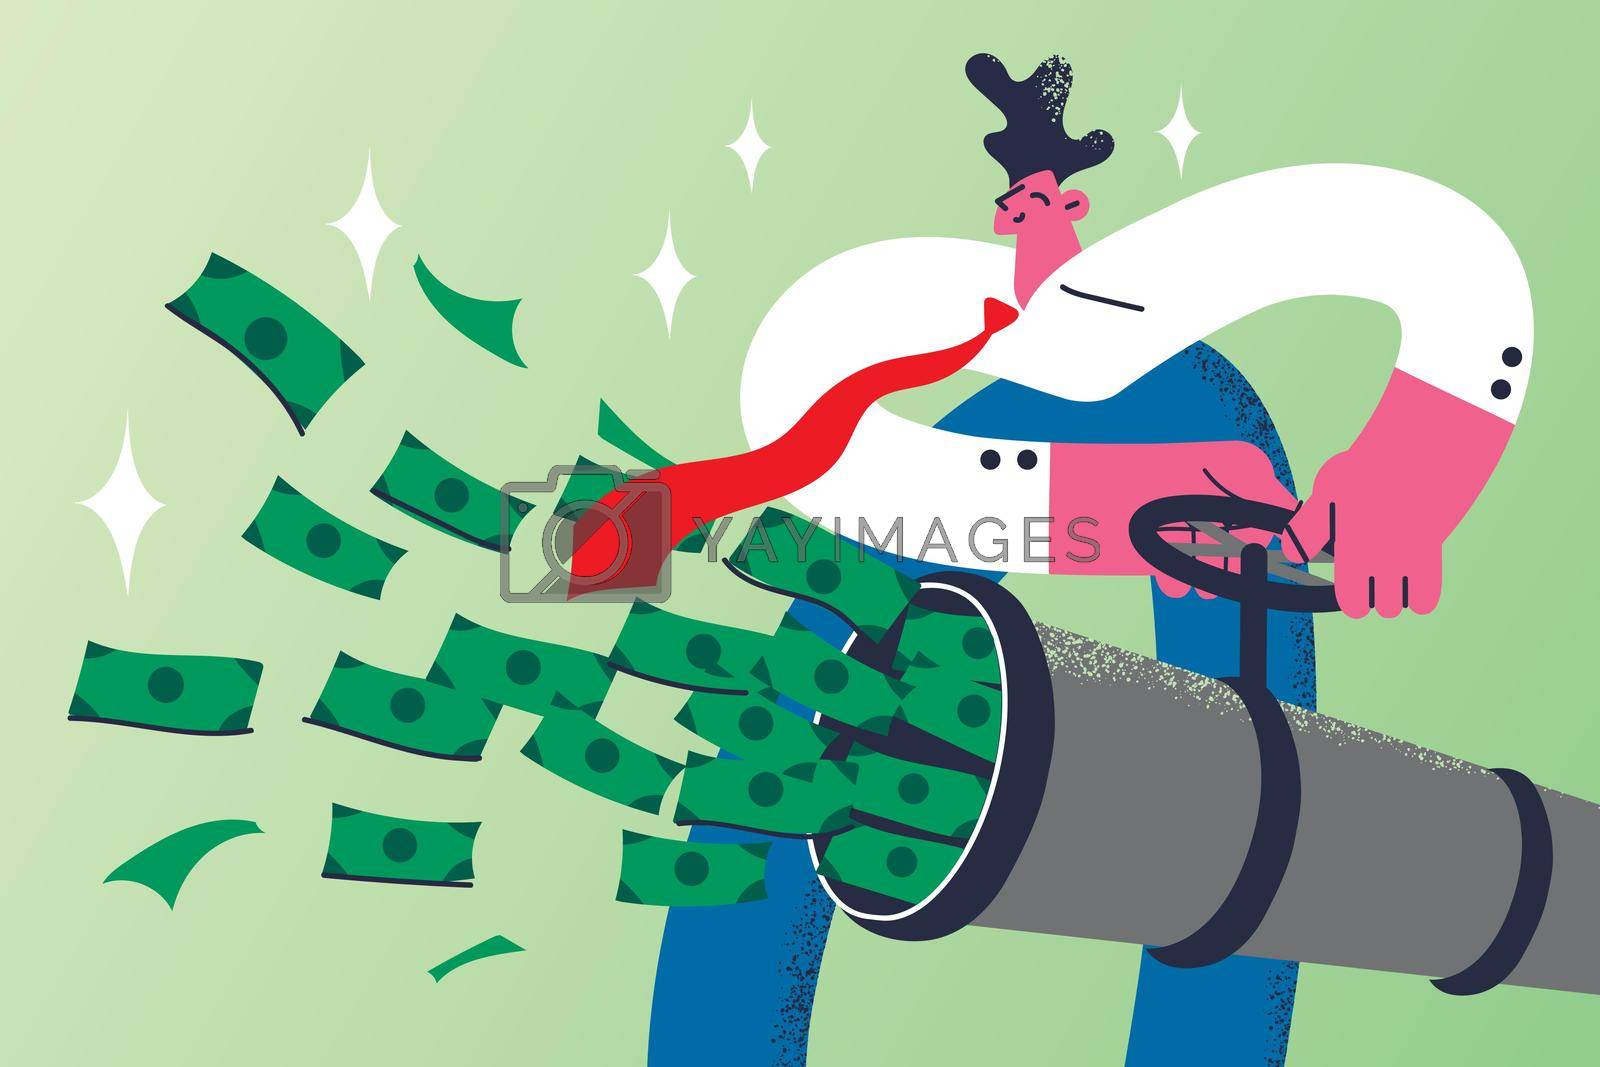 Making money, financial success concept. Young smiling businessman standing using cannon to make heaps and stacks of money cash vector illustration